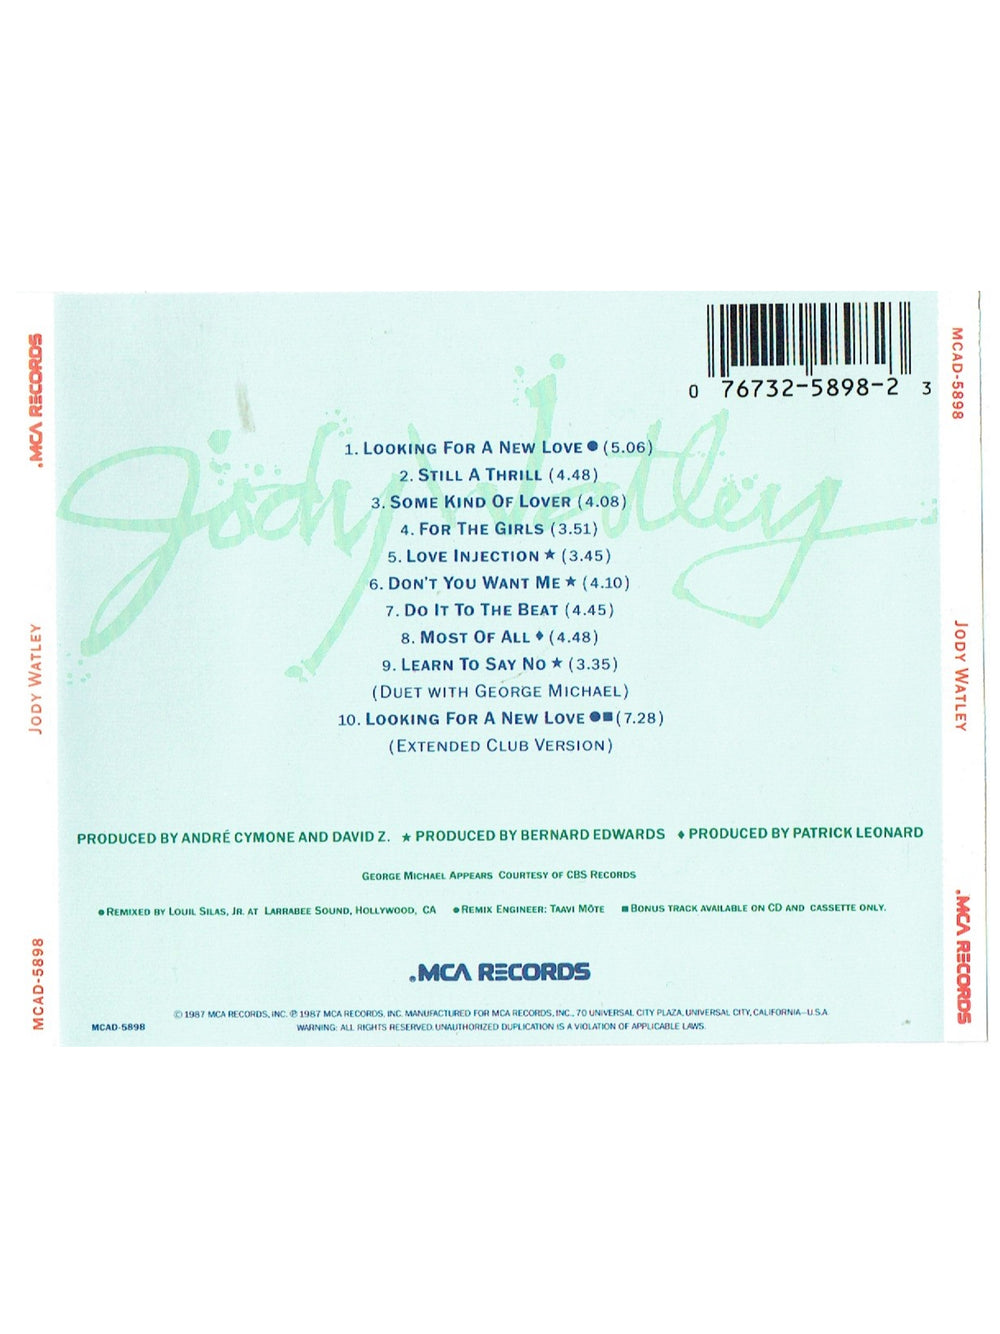 Prince – Jody Watley Self Titled CD Album Produced By Andre Cymone USA Release Prince